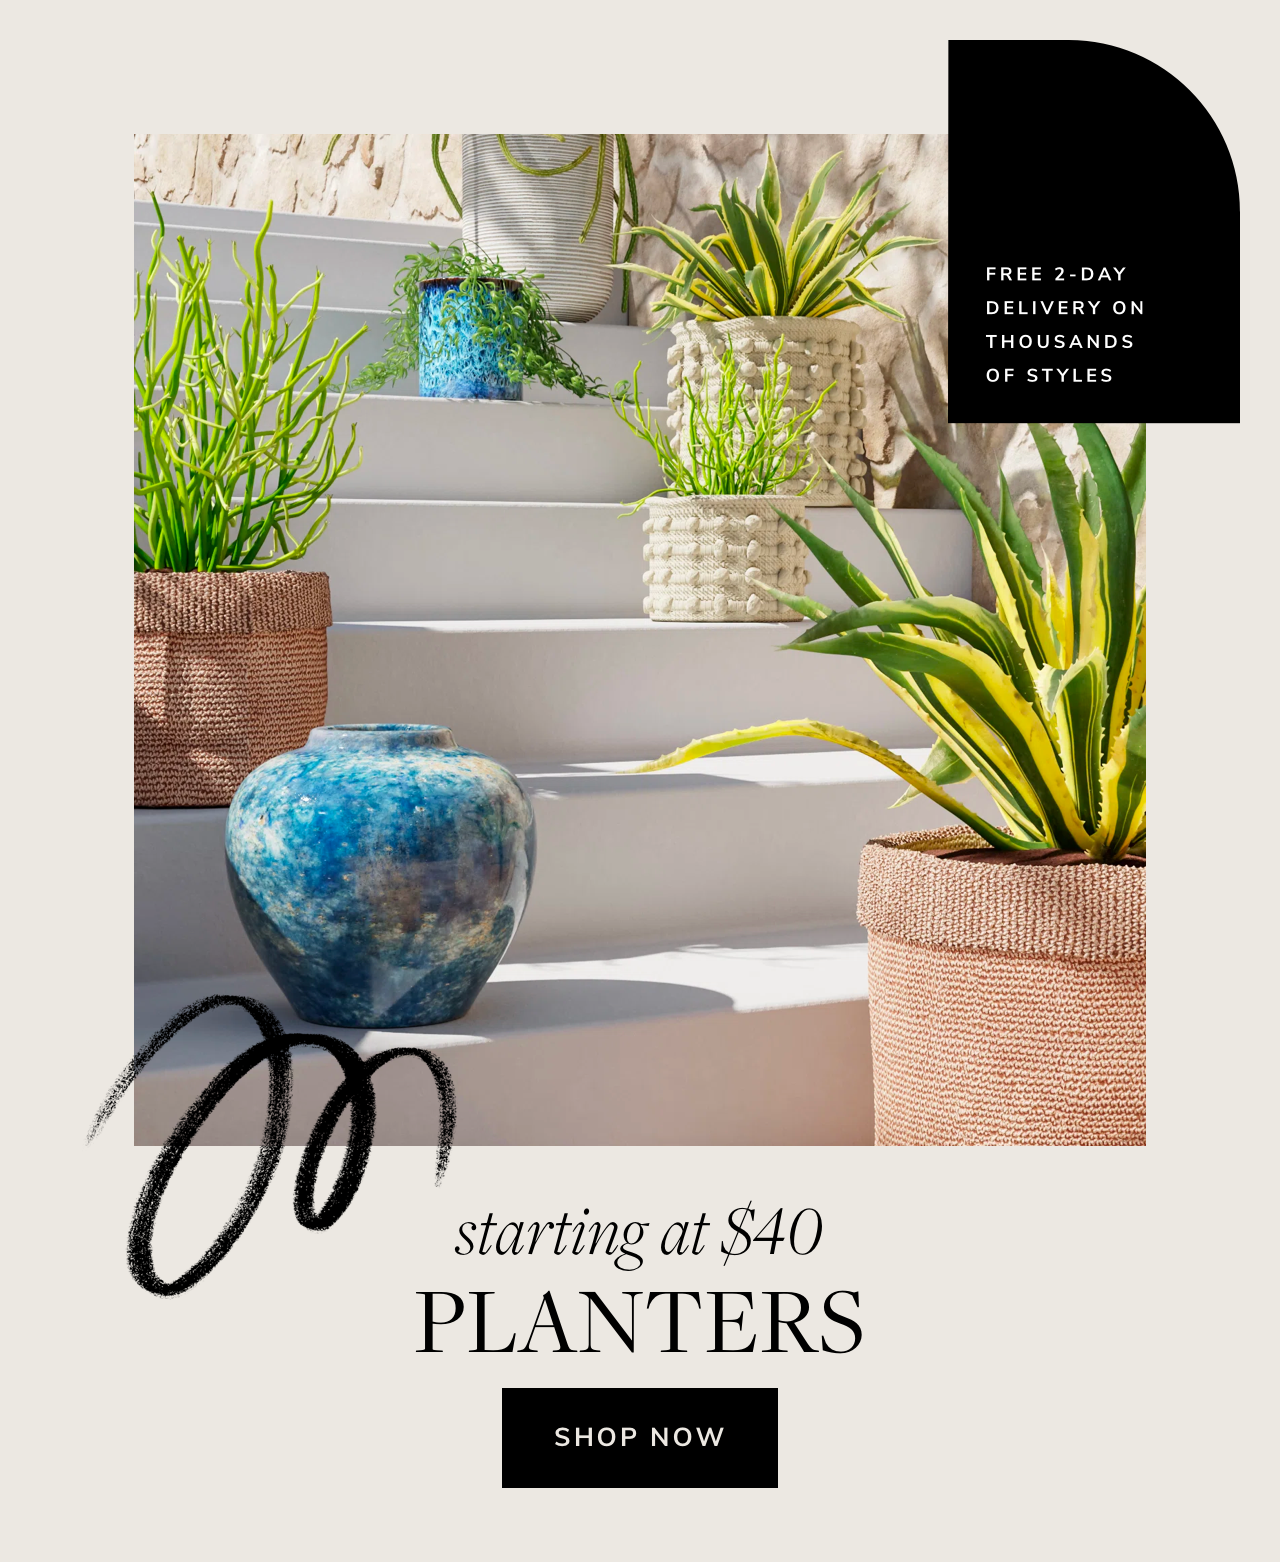 FREE 2-DAY DELIVERY ON THOUSANDS OF STYLES starting at $40 PLANTERS SHOP NOW 